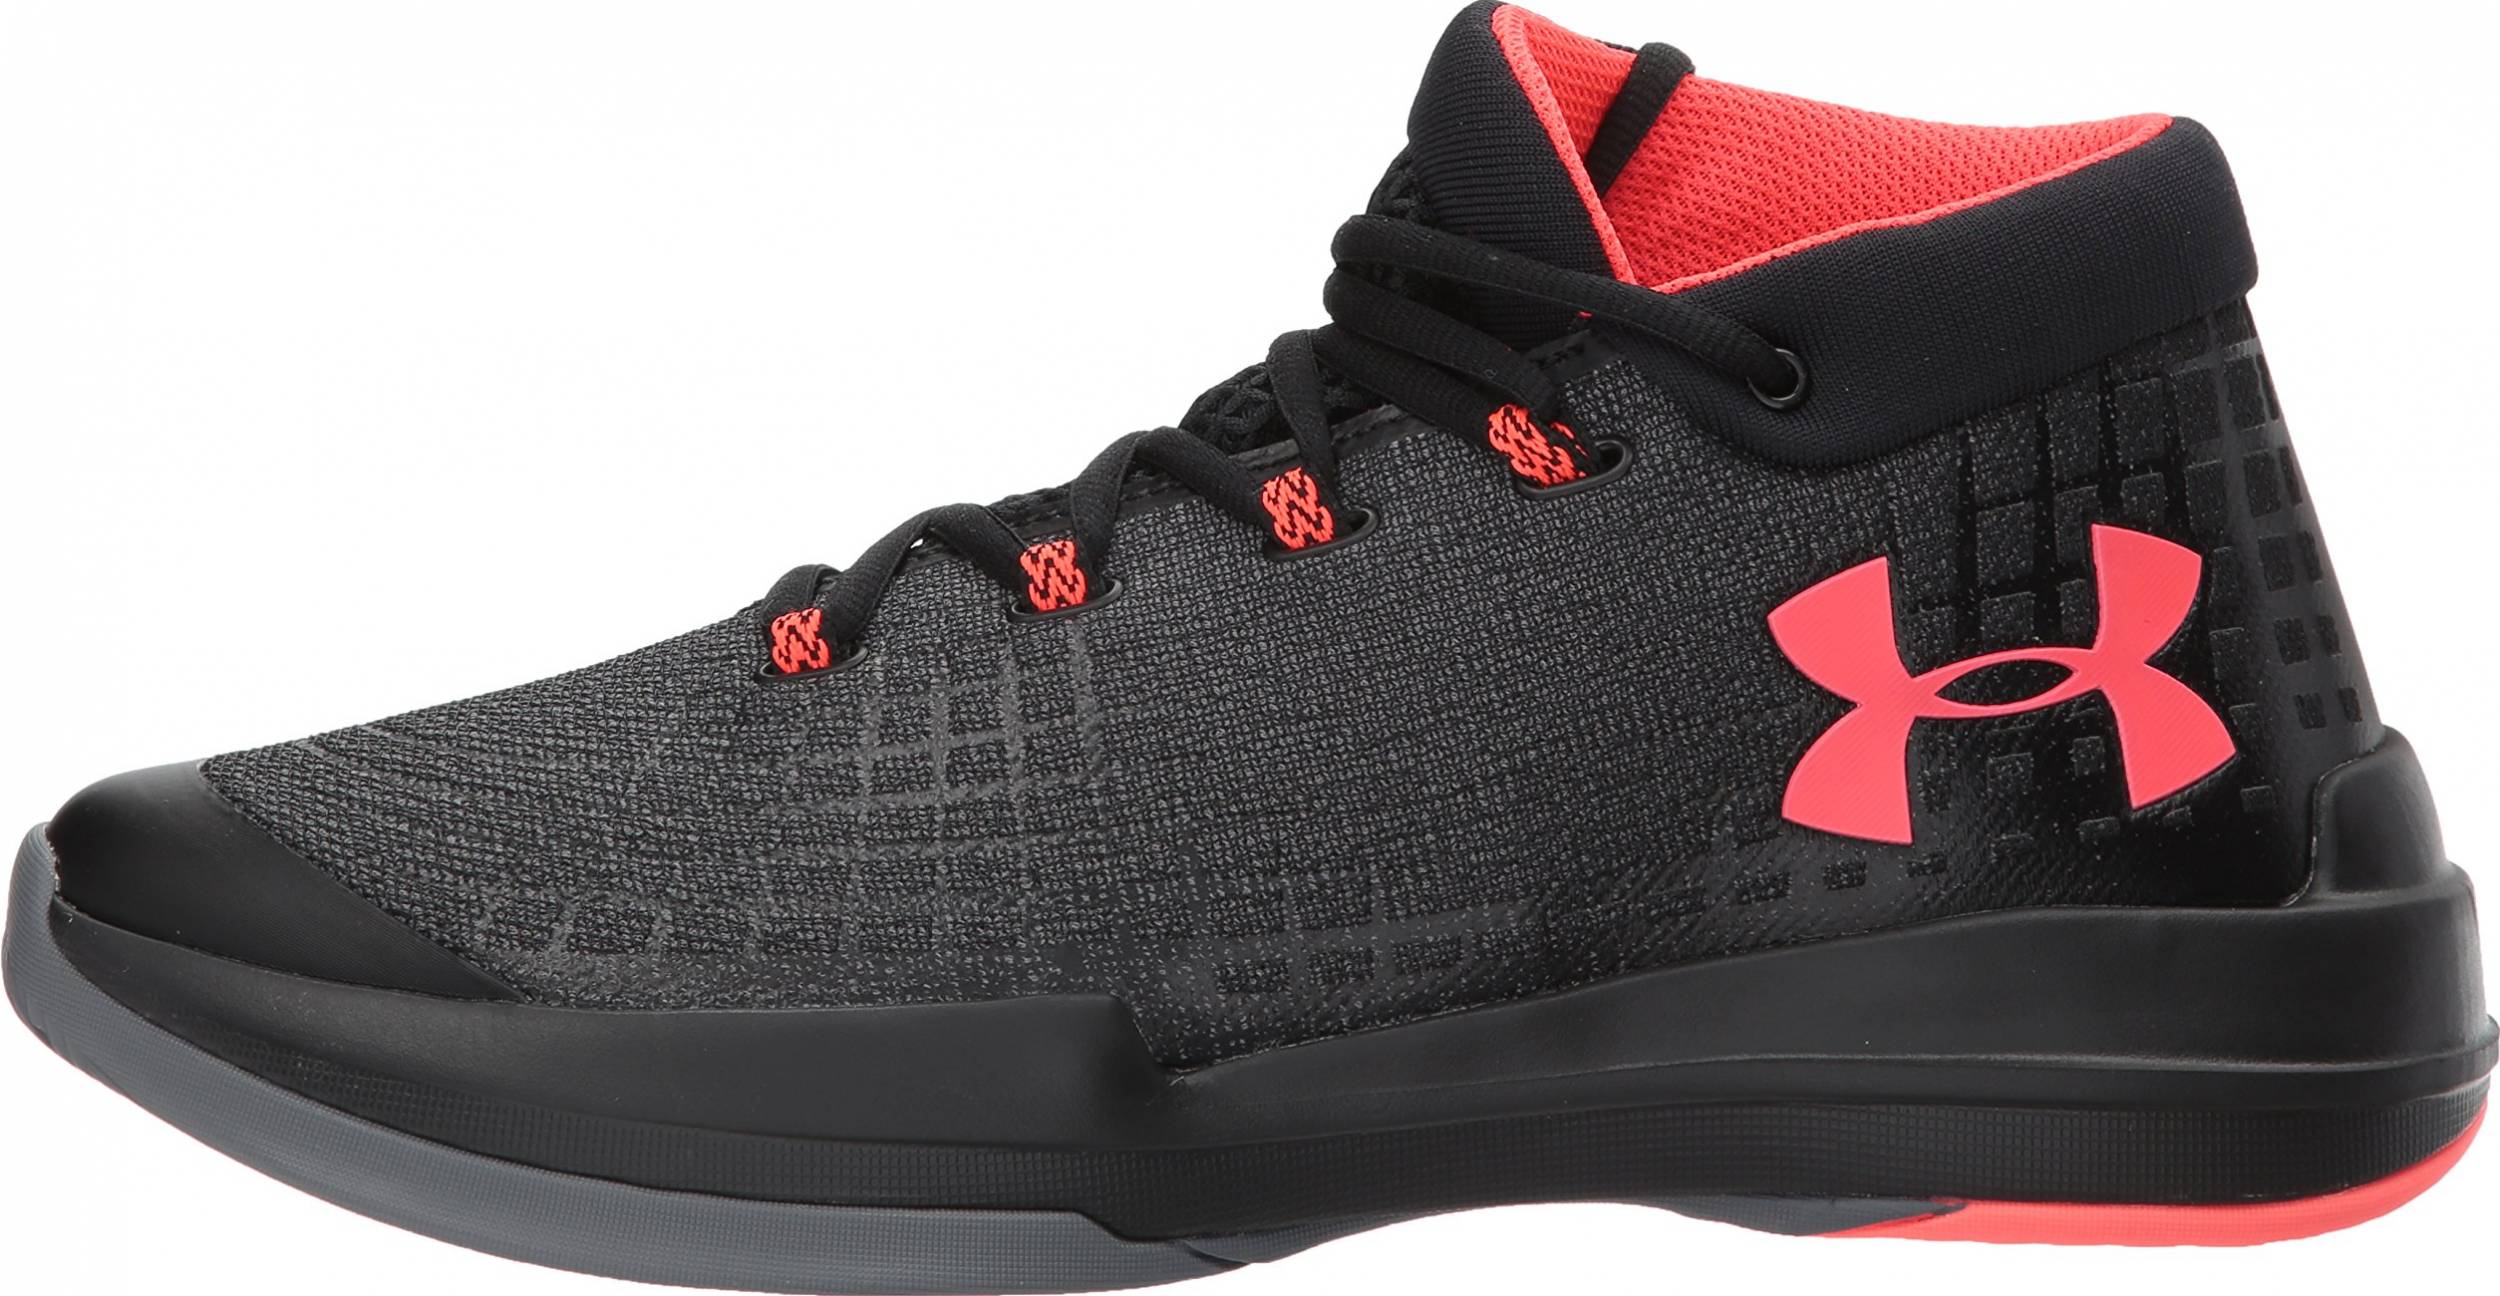 red and black under armour shoes